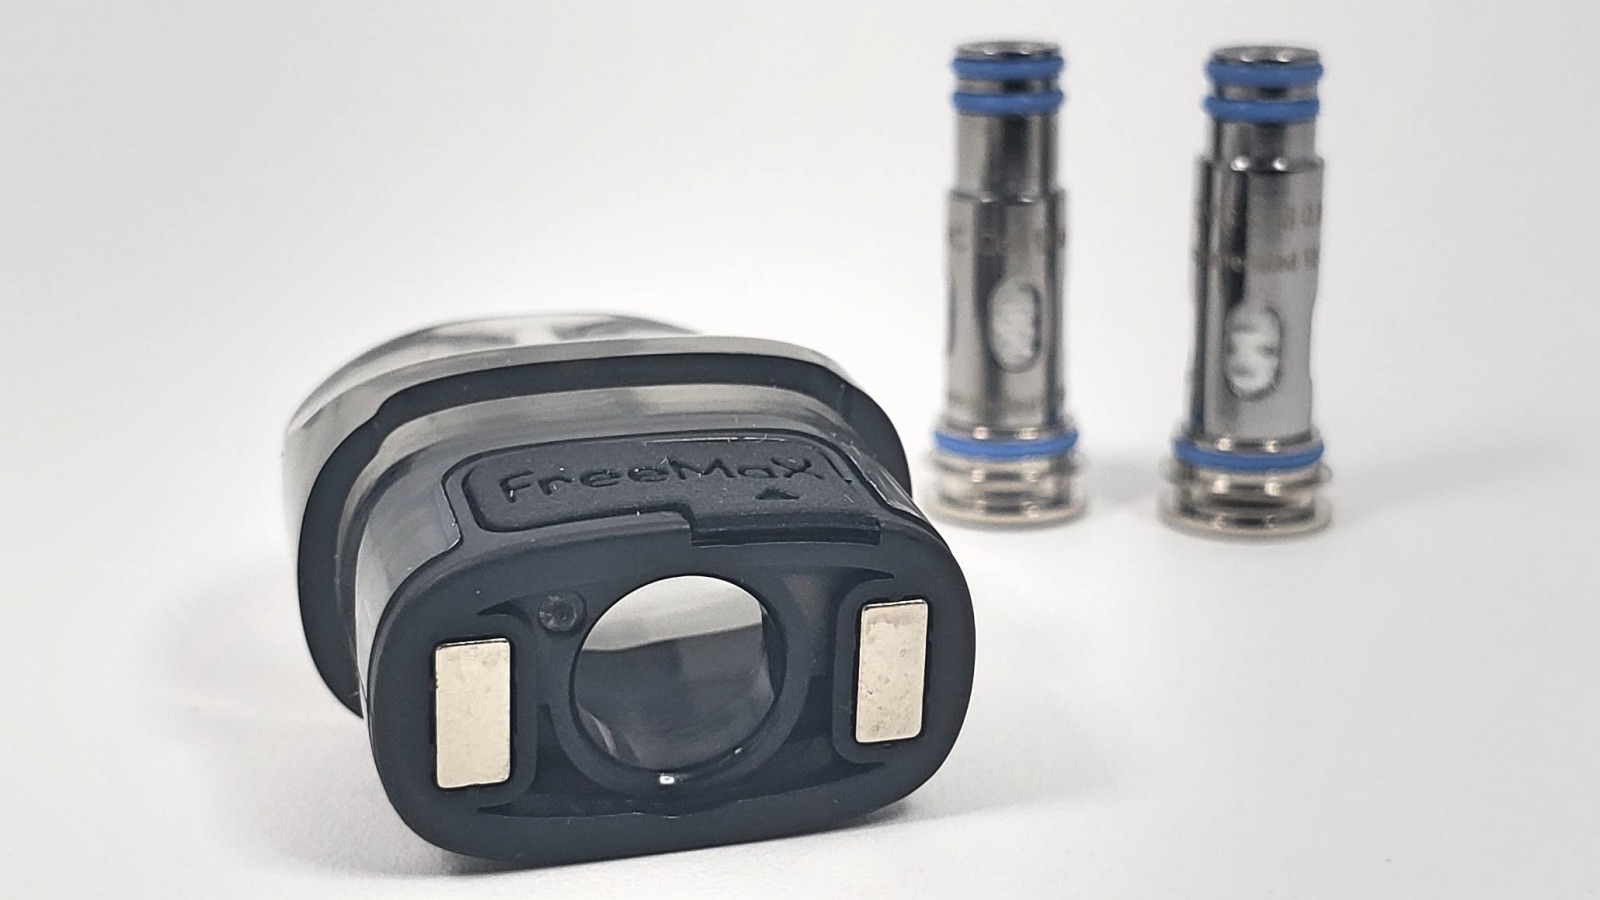 Coil inserted in the Freemax Onnix 2 pod